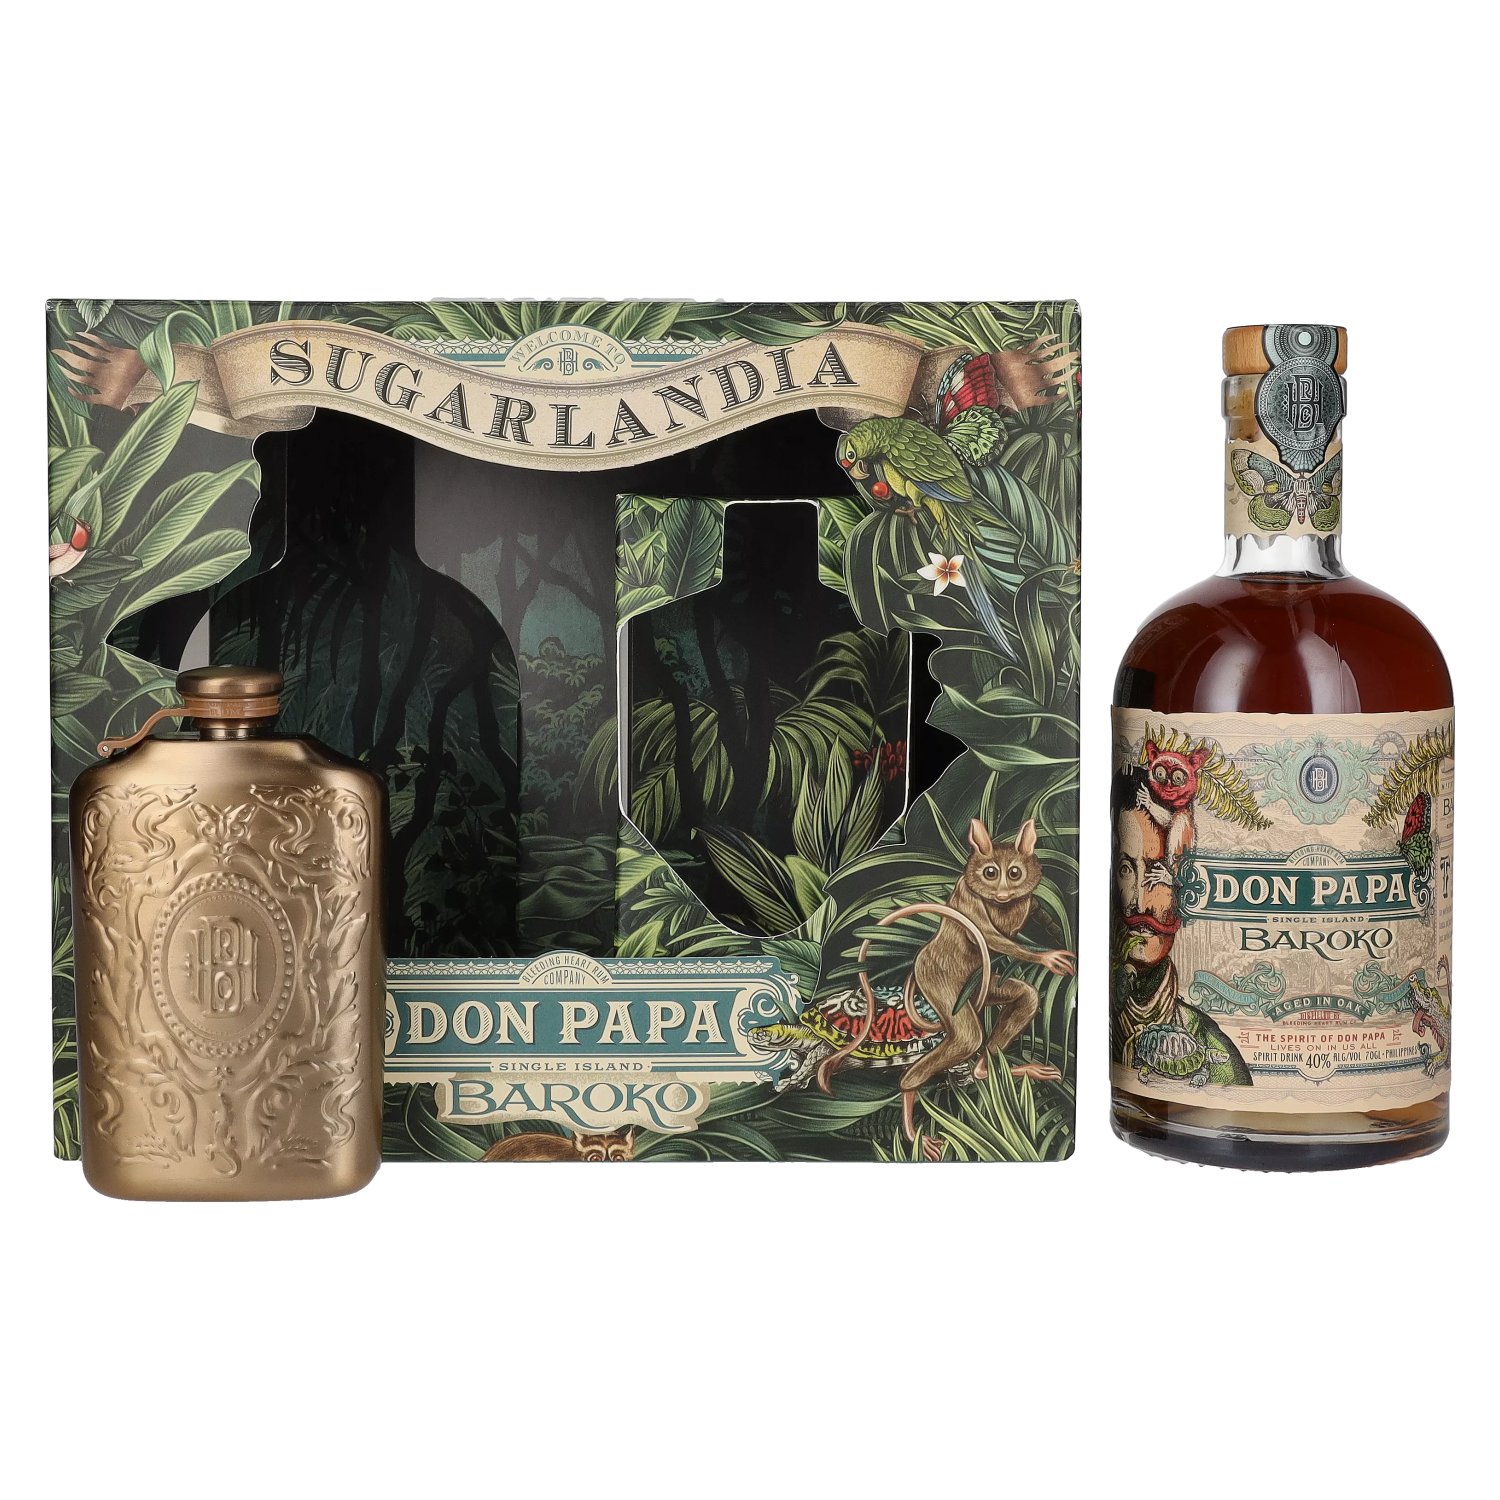 Don Papa BAROKO 40% Vol. 0,7l in Giftbox with Hip Flask